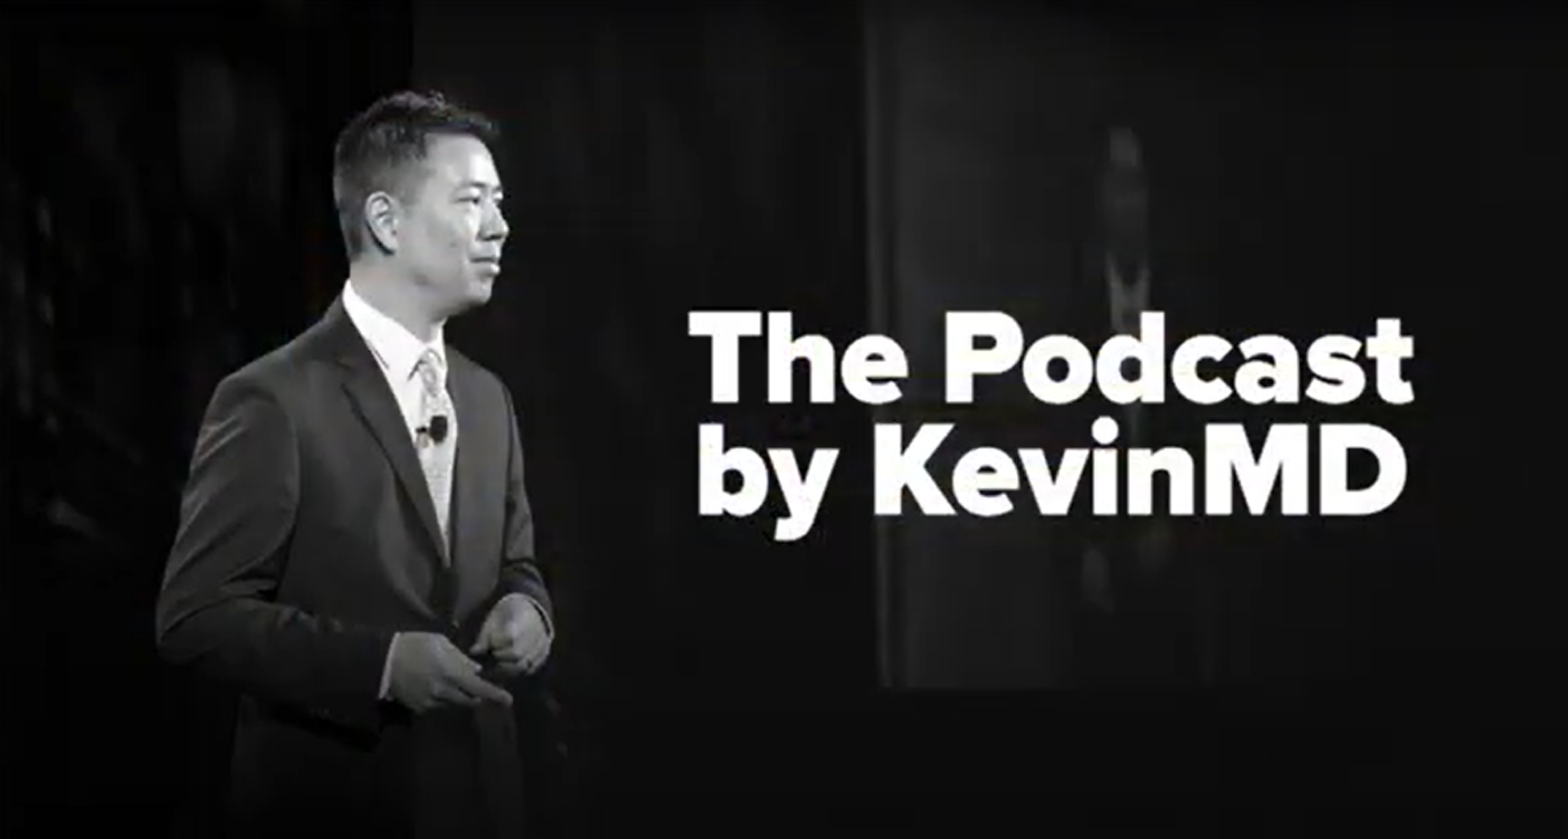 Podcast with KevinMD and Trinity med student